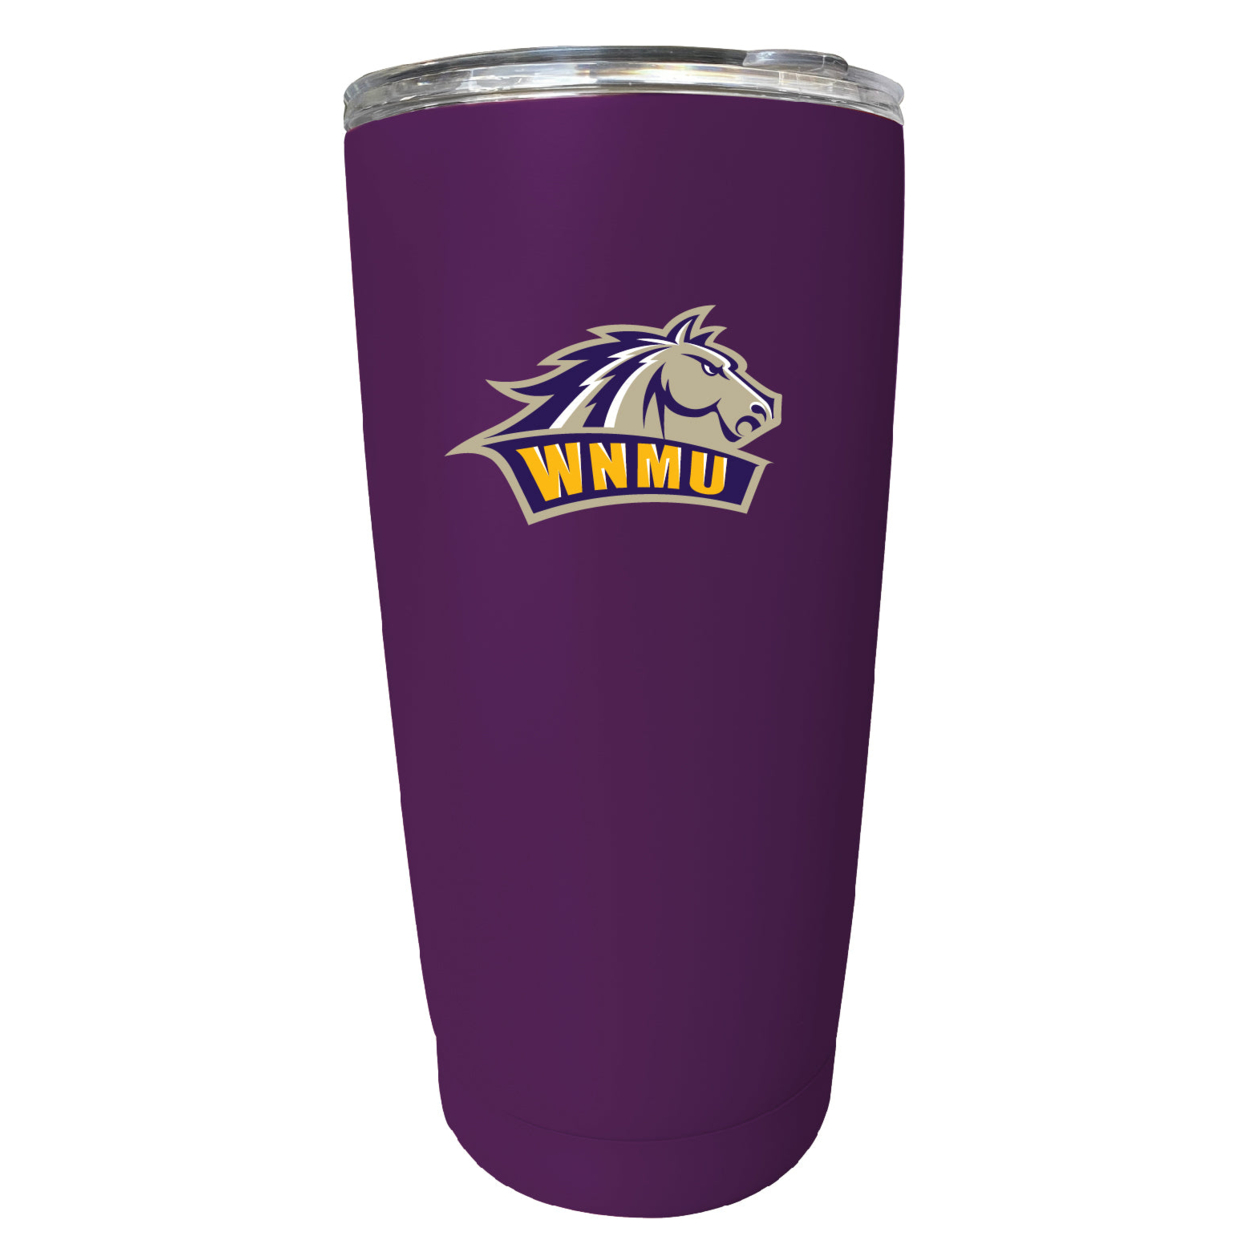 Western New Mexico University 16 Oz Stainless Steel Insulated Tumbler - Gray